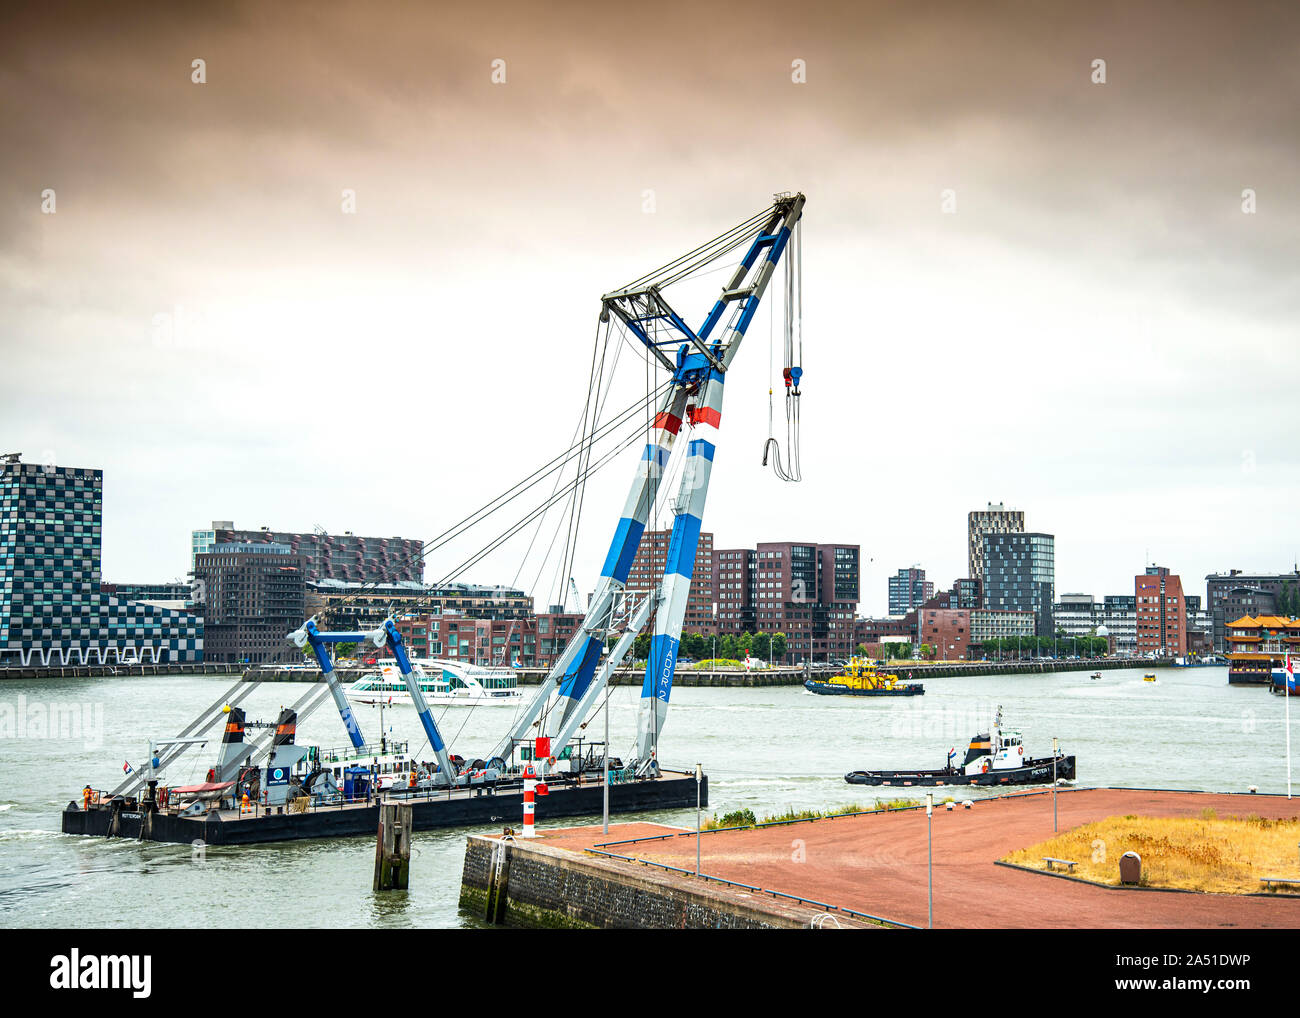 Matador 2 large floating non propelled crane used lifting heavy industrial parts,working in the port of Rotterdam,and offshore wind turbine projects. Stock Photo